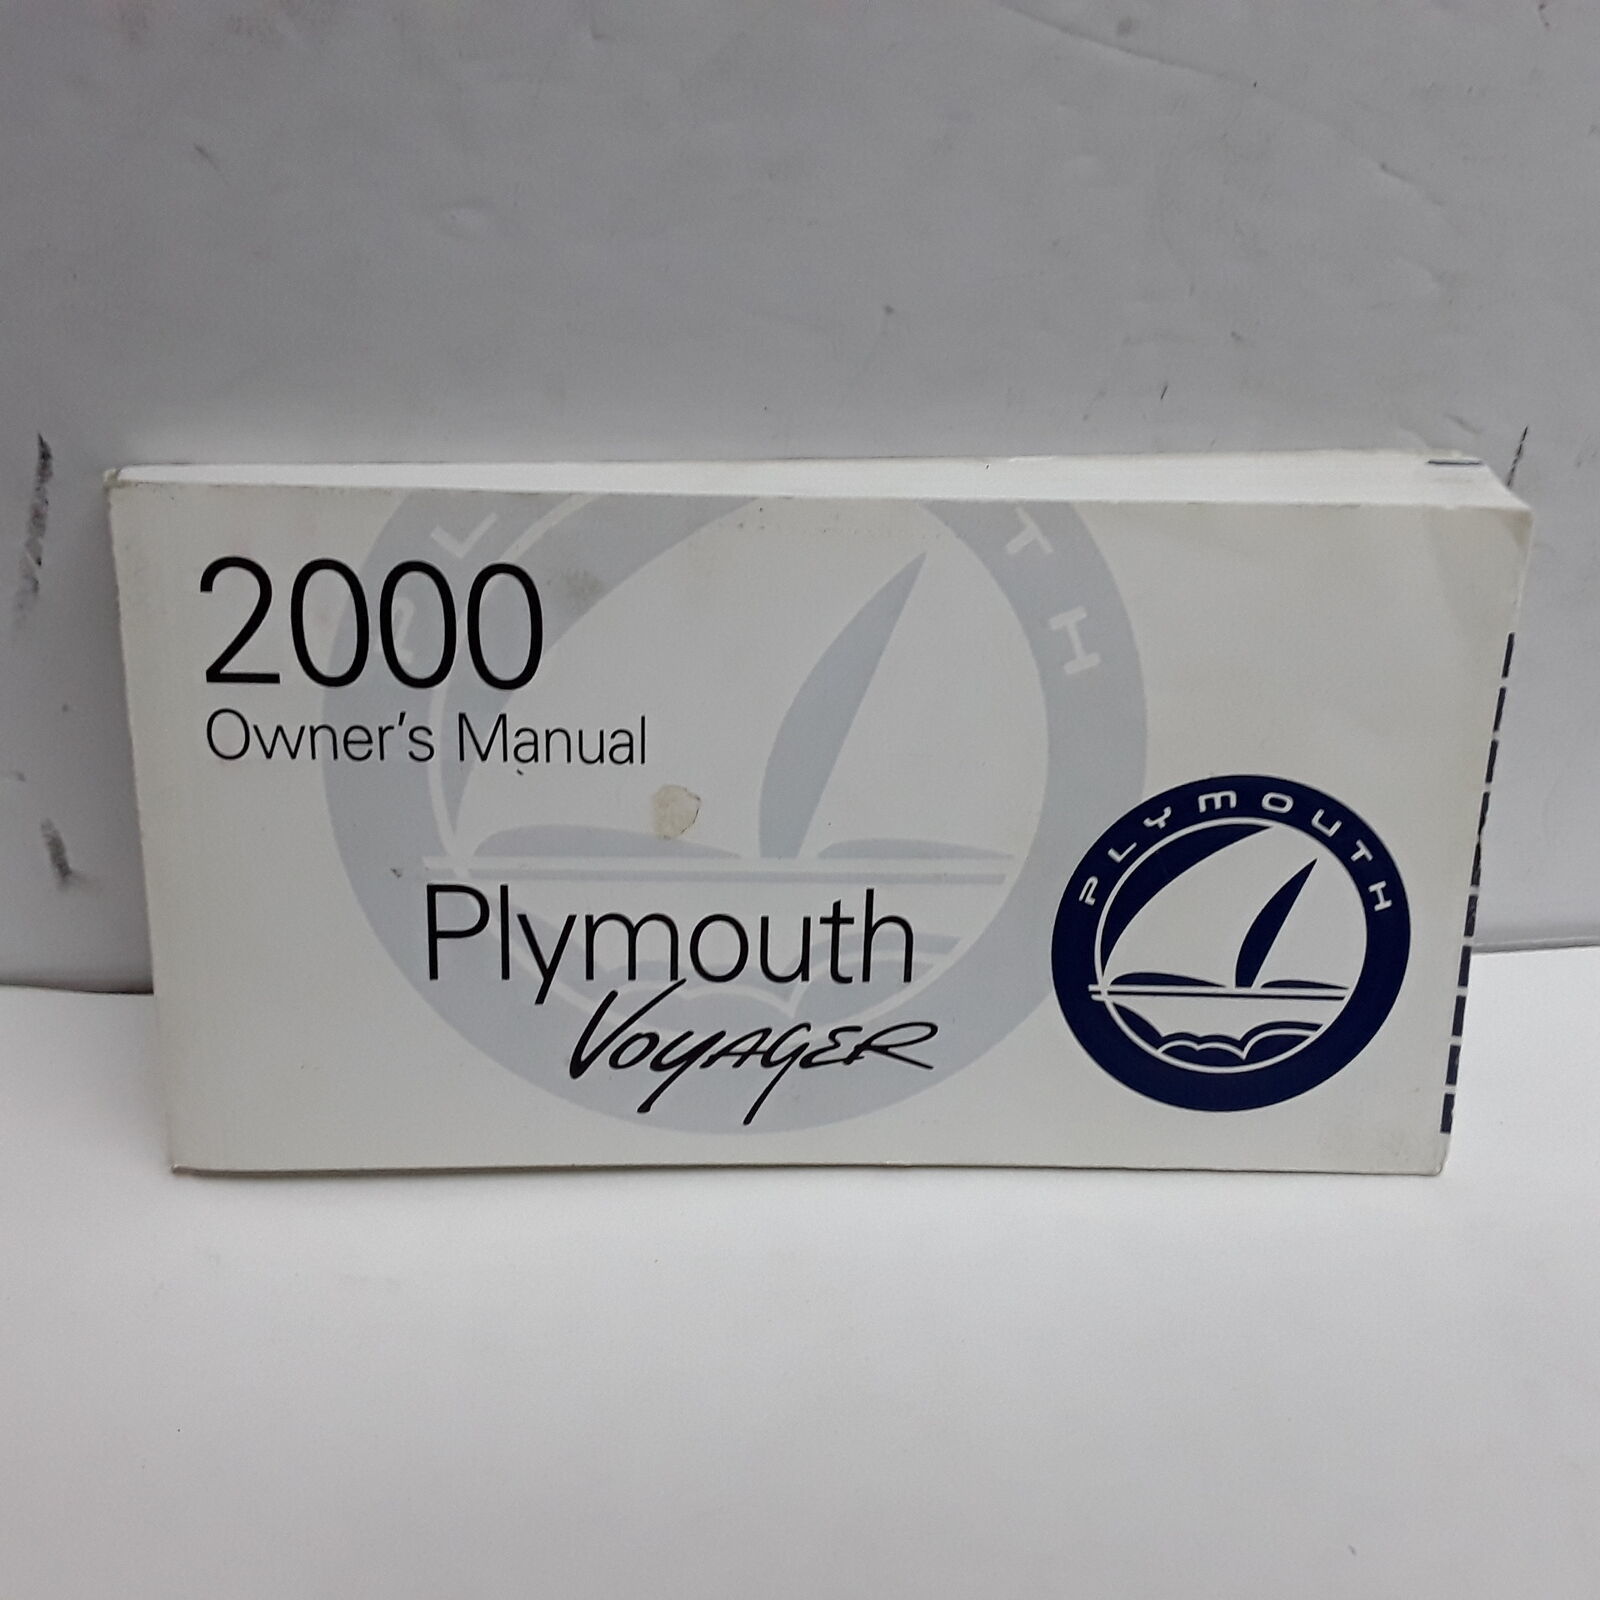 2000 Plymouth Voyager Owners Manual - Nonfiction